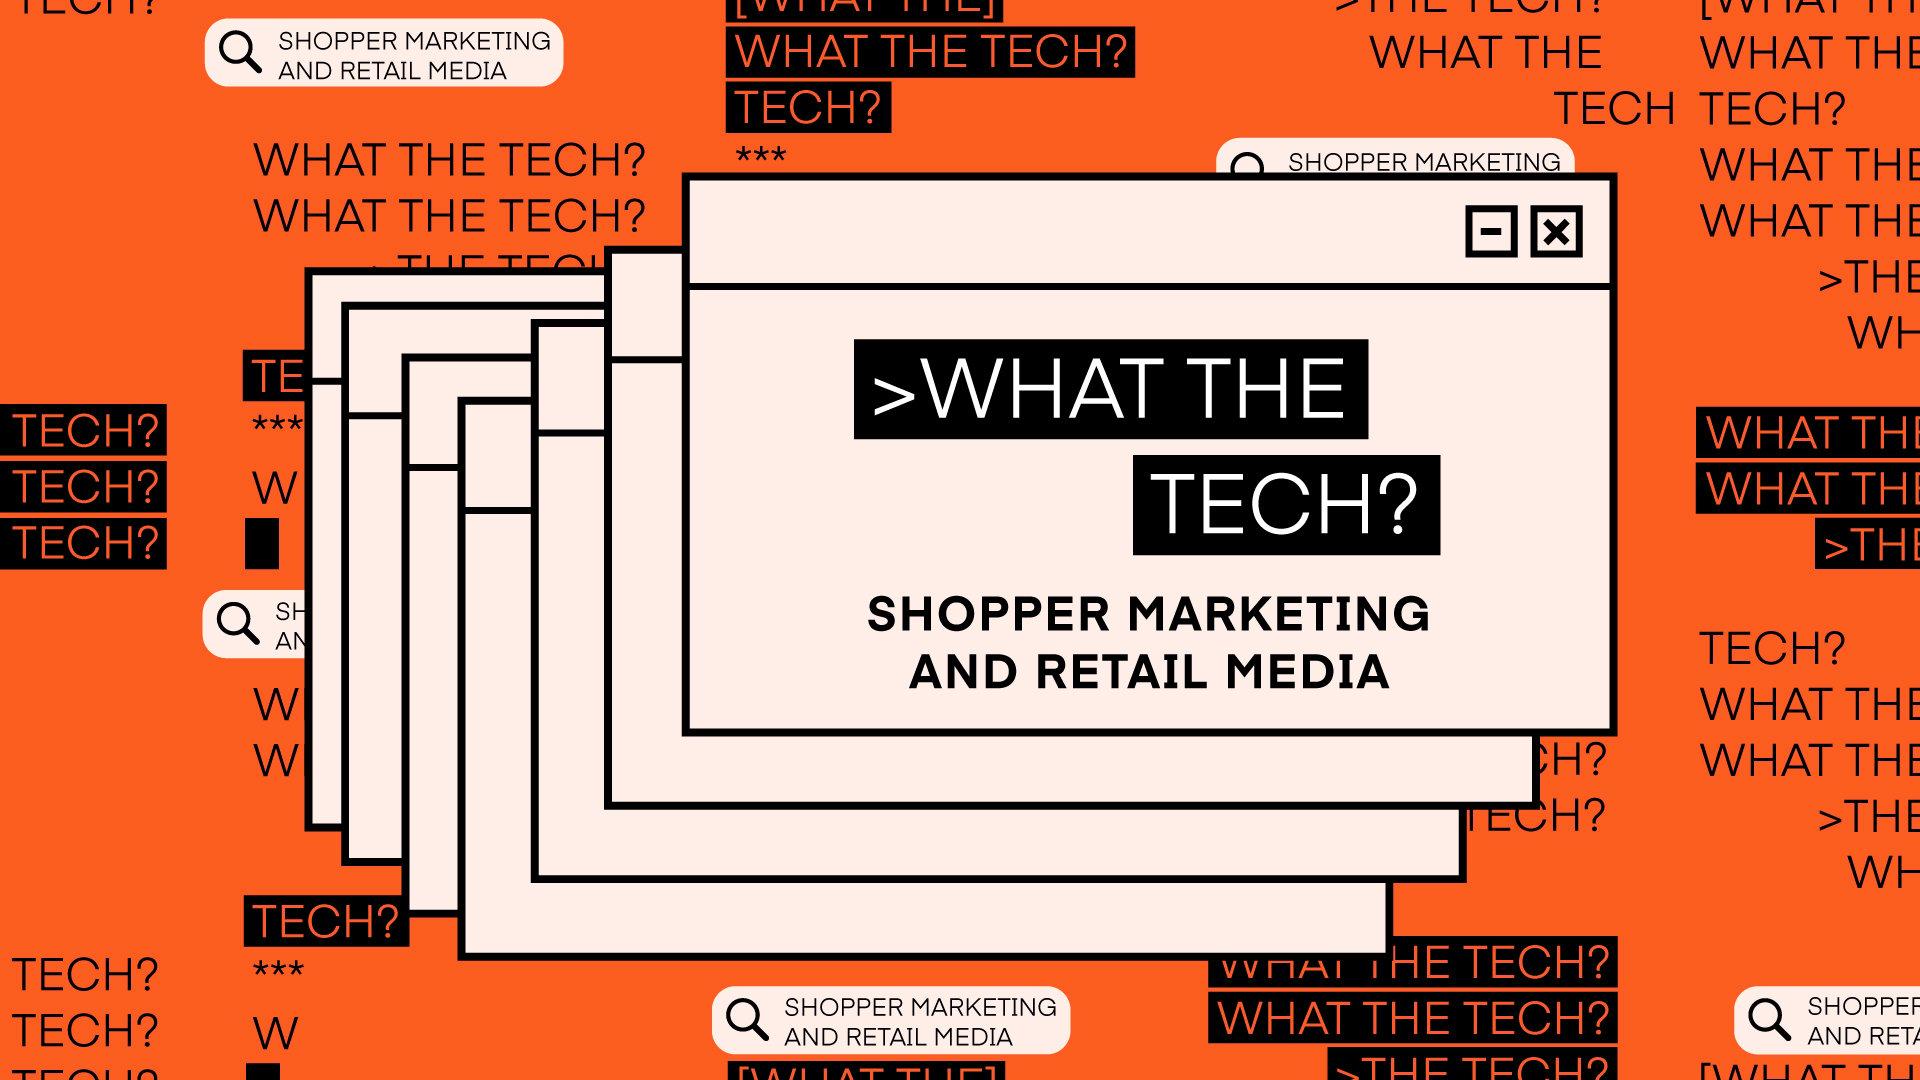 What the Tech is shopper marketing and retail media?